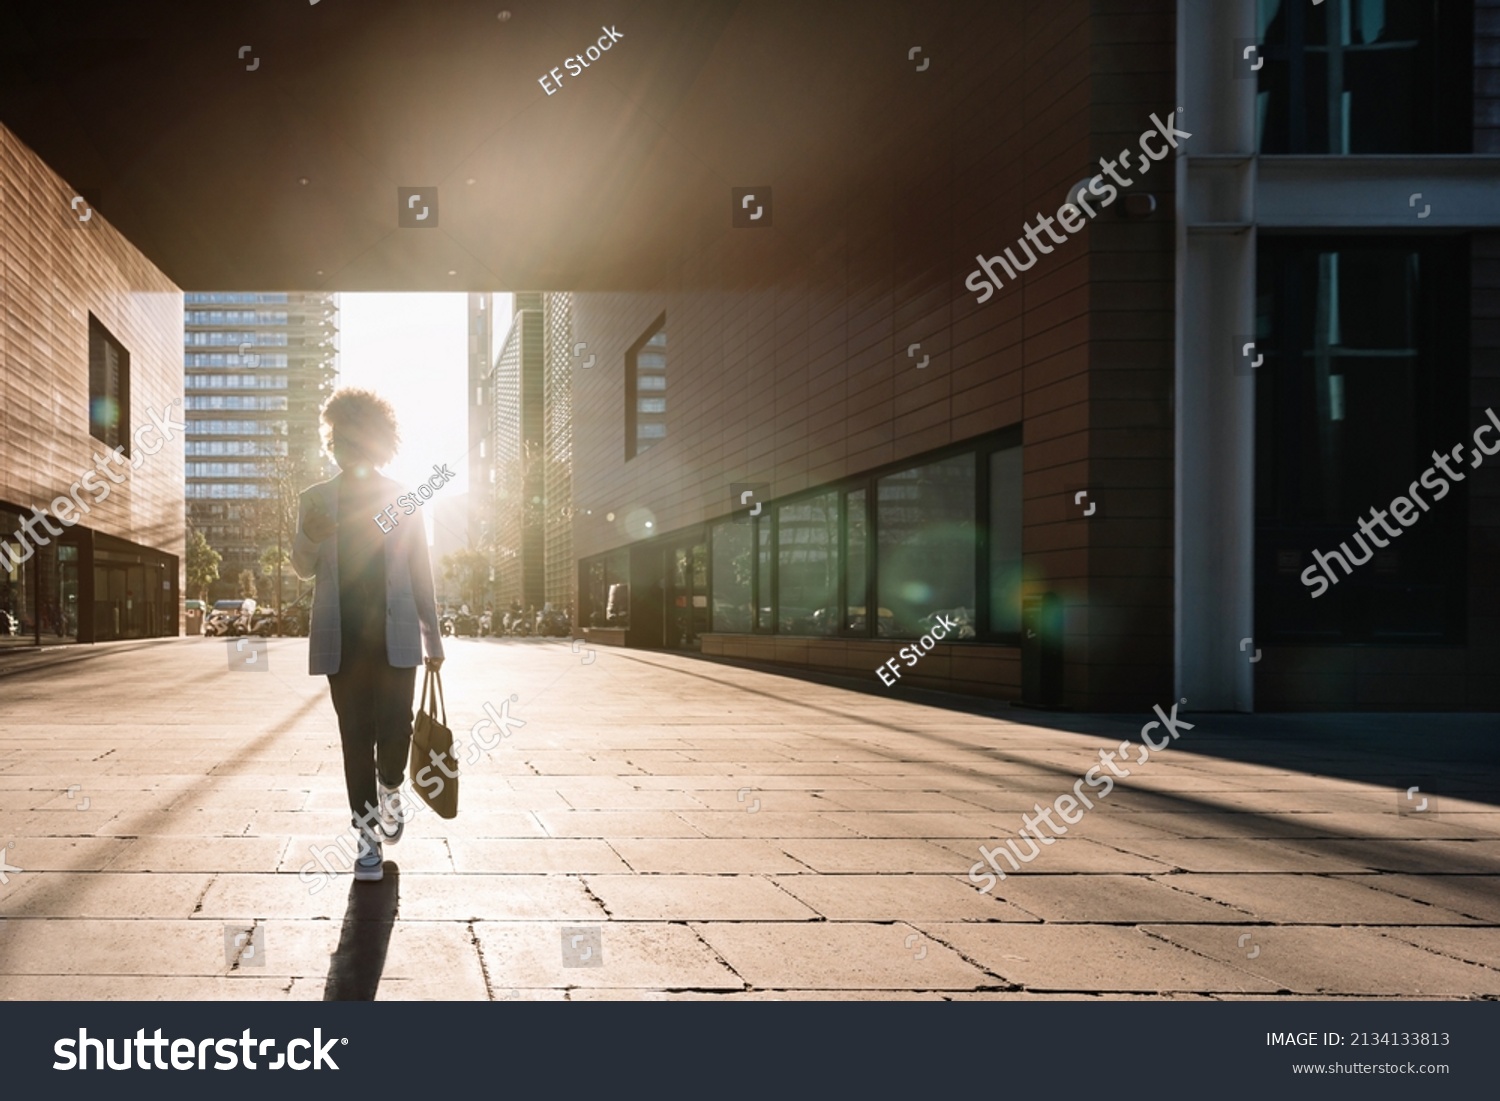 Silhouette of Black business woman walking in a financial district in the city using phone going to office work. Concept of inspiration, enthusiasm, start-up, feminism #2134133813